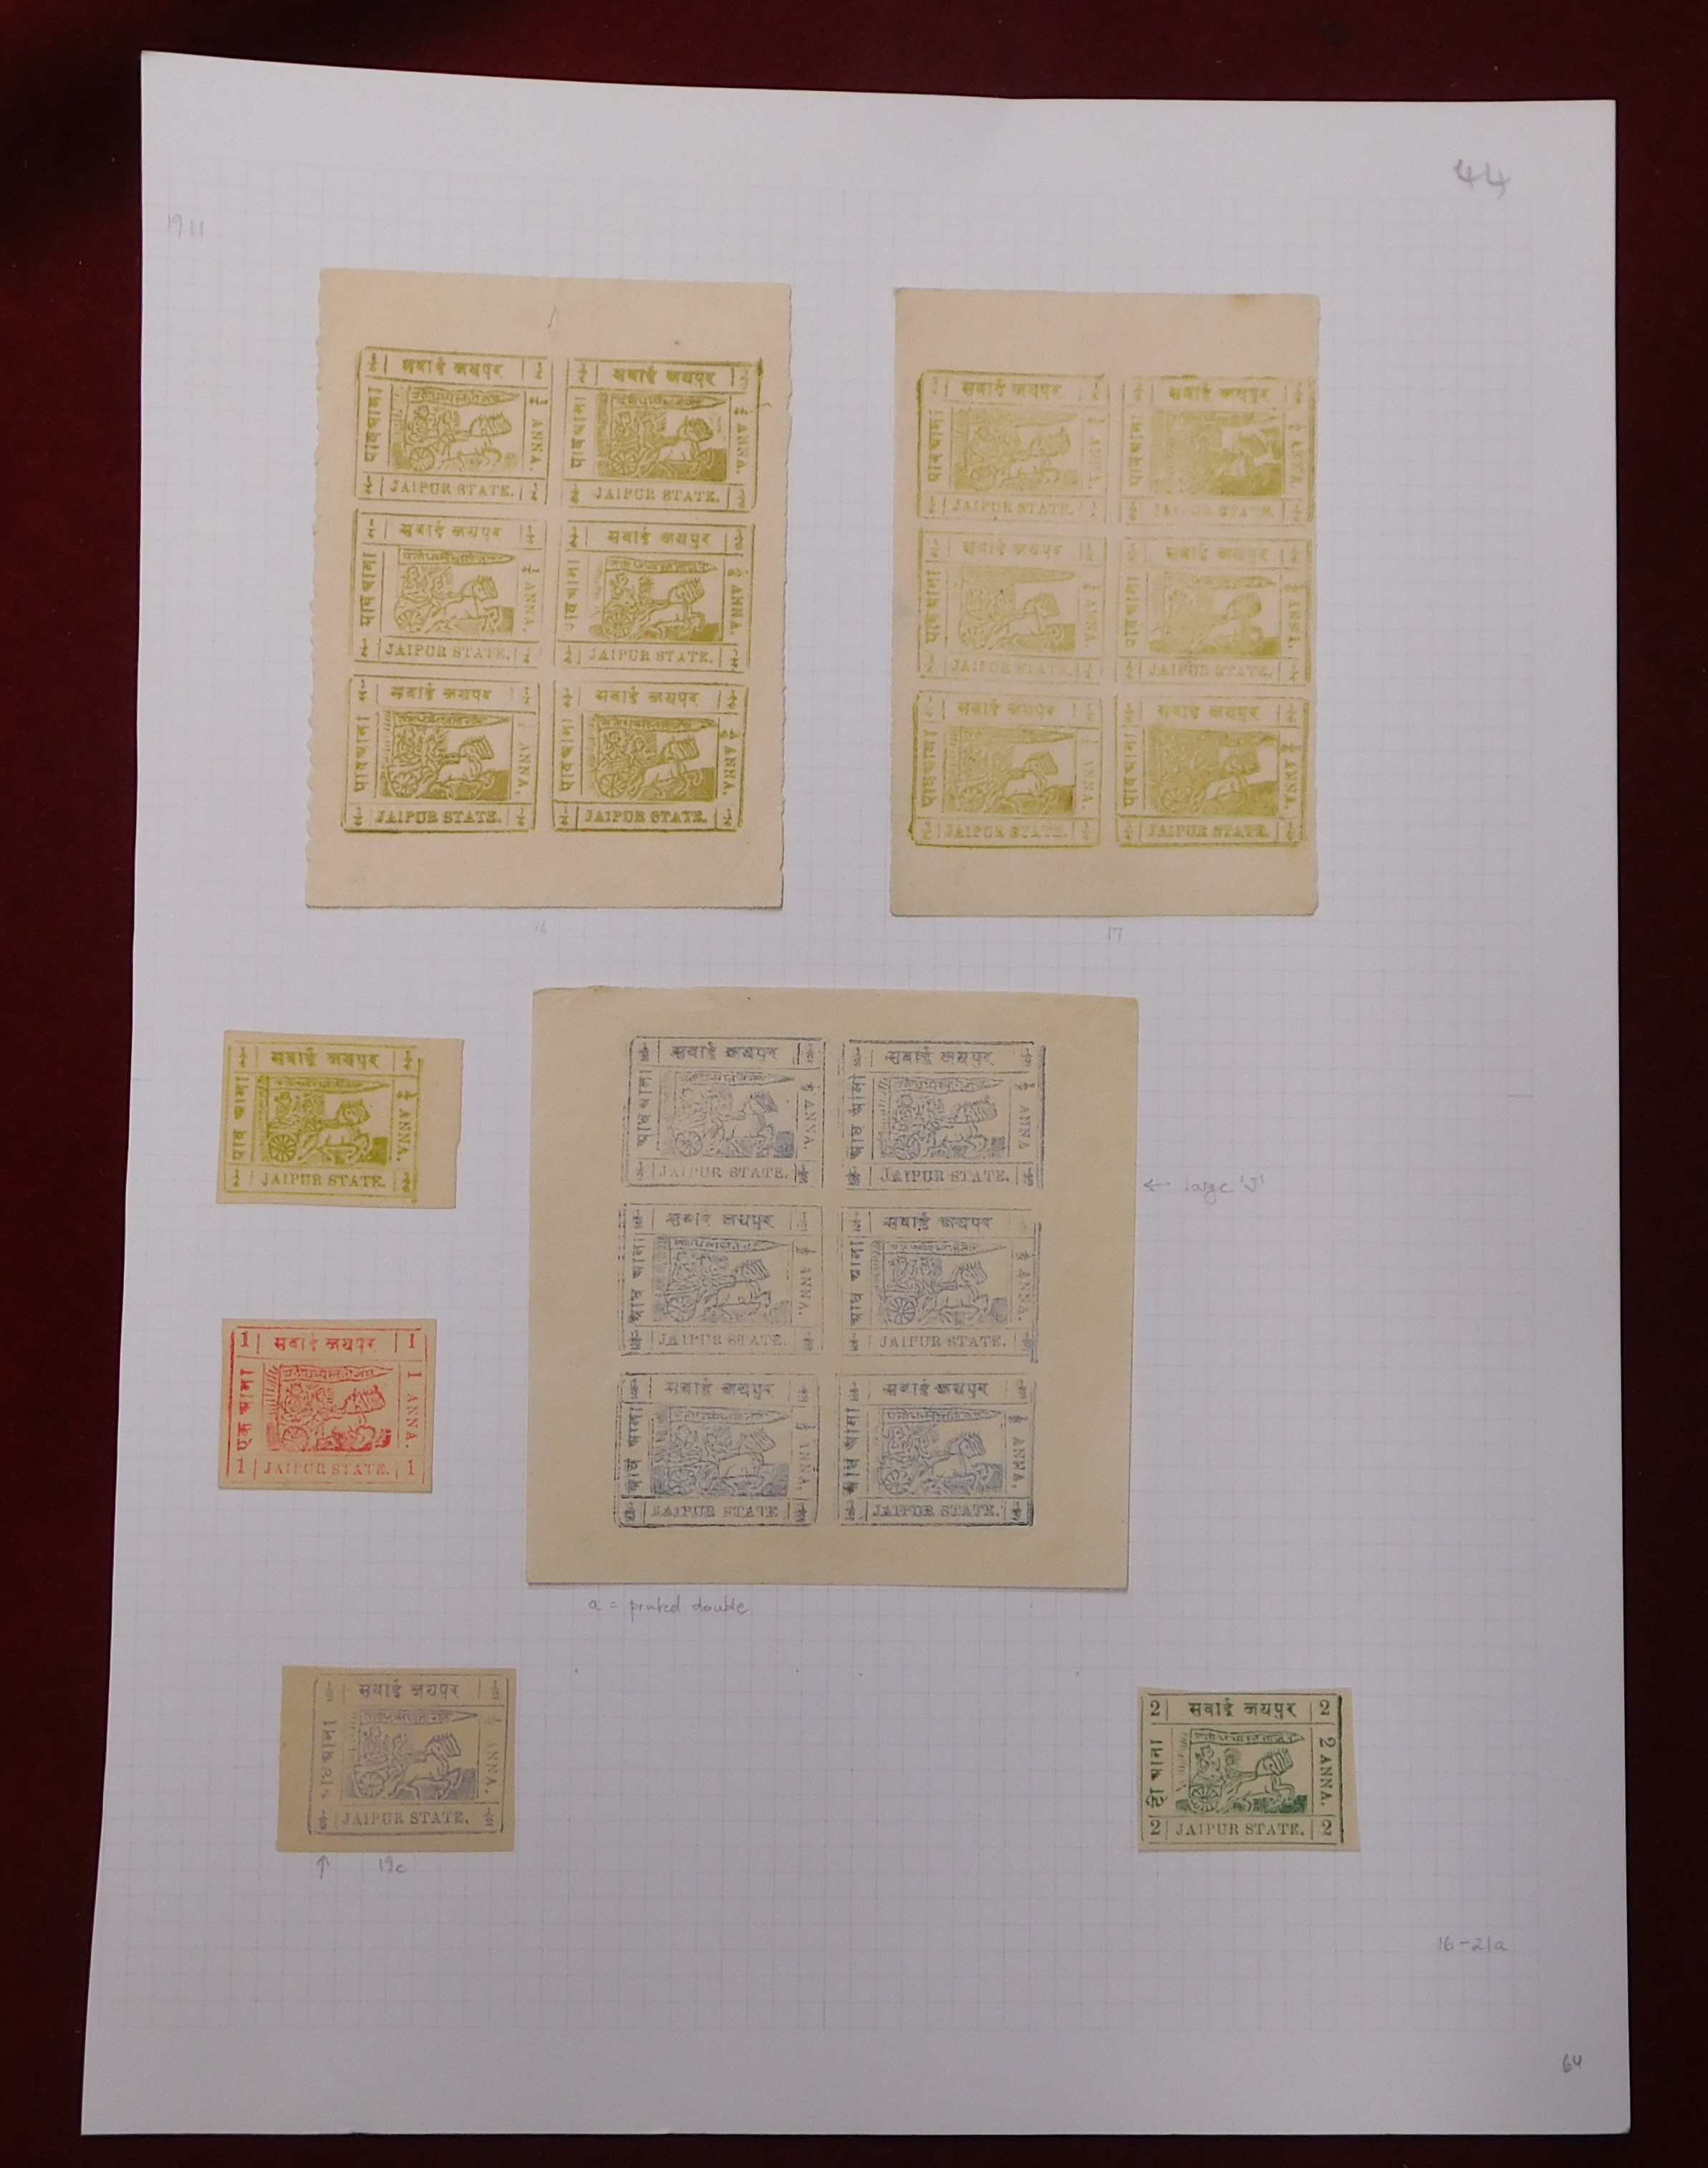 India (Jaipur) 1911 m/mint with 1/4 Anna, SG 16; SG 17 in sheetlets of four, SG 18 Printed double